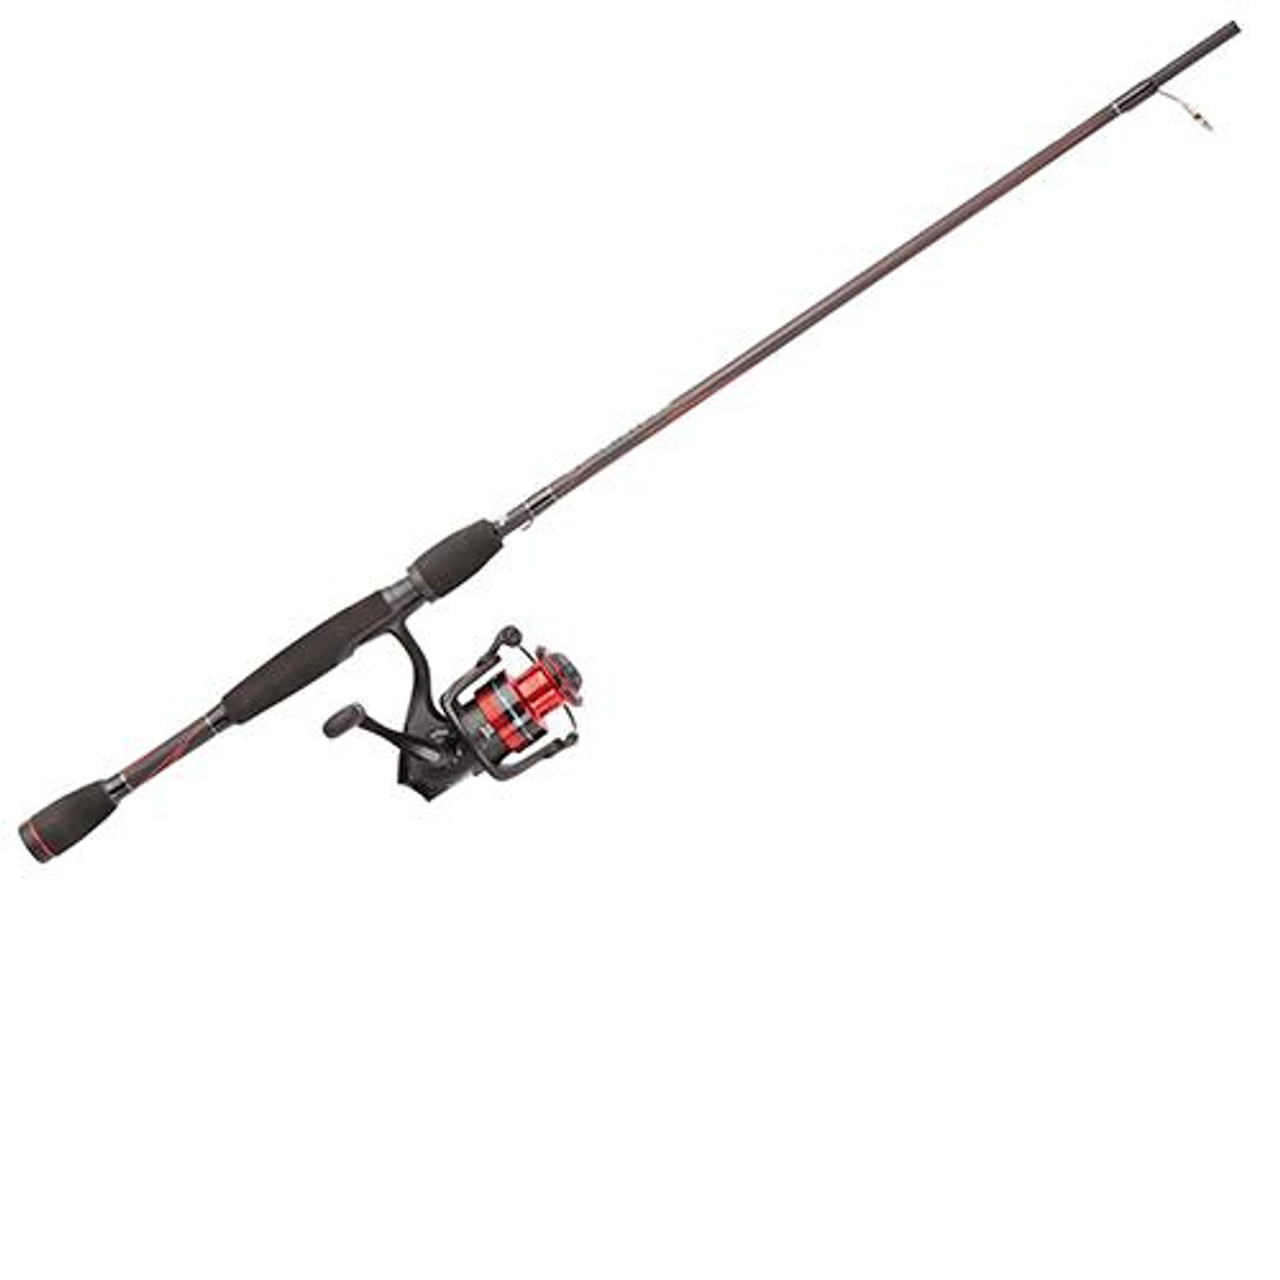 Abu Garcia 6' Max PRO Fishing Rod and Reel Spincast Combo 2-Piece